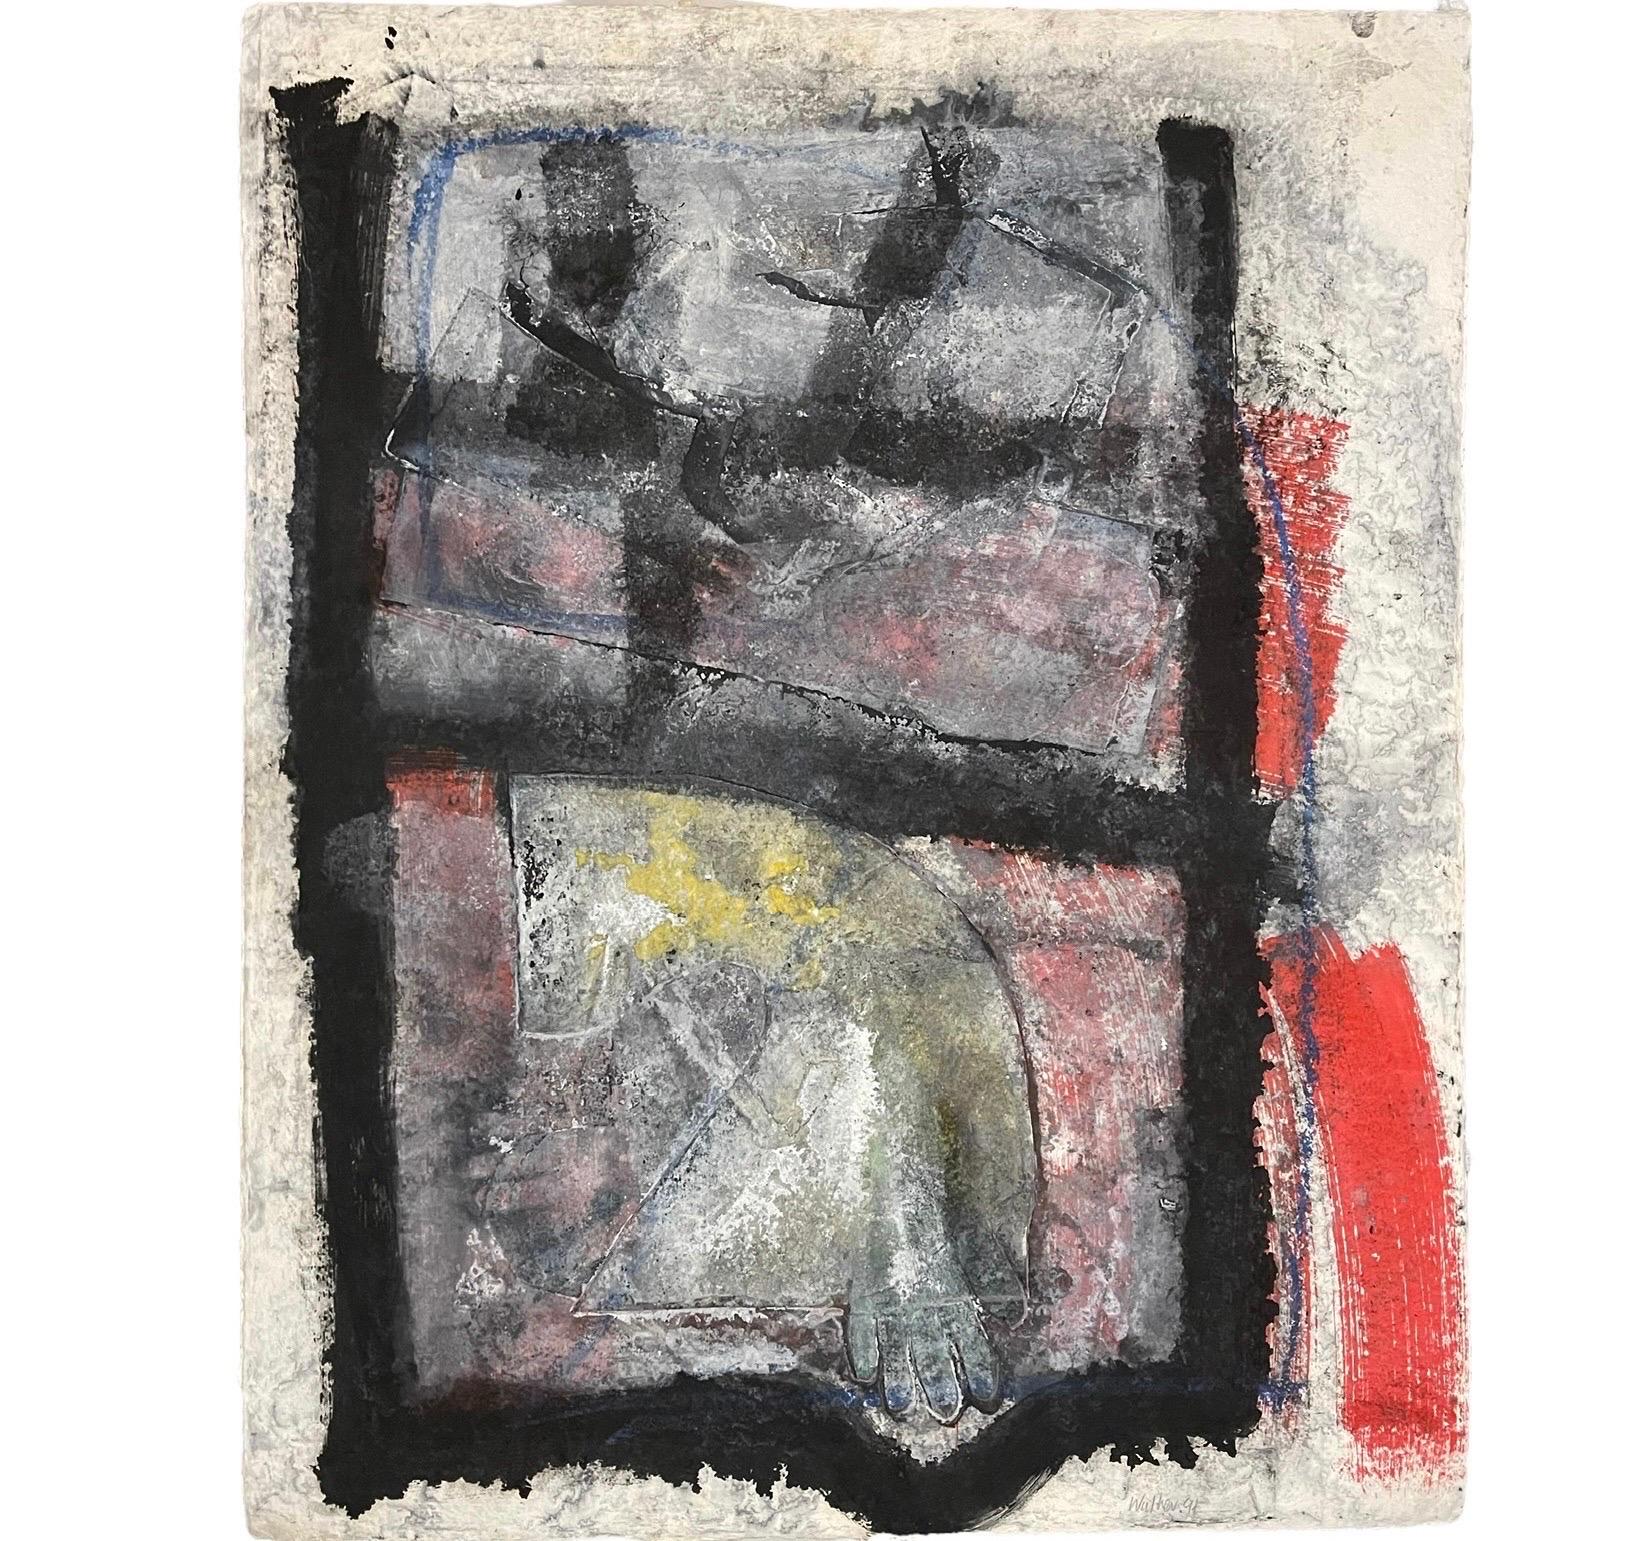 John Walker British (b. 1939)
Salsipuedes Forms (1991)
Monoprint relief print with dry pigment, monotype
Hand signed lower right
Provenance: Garner Tullis Workshop

A monotype is literally one of a kind; it is not a method of multiplication. The